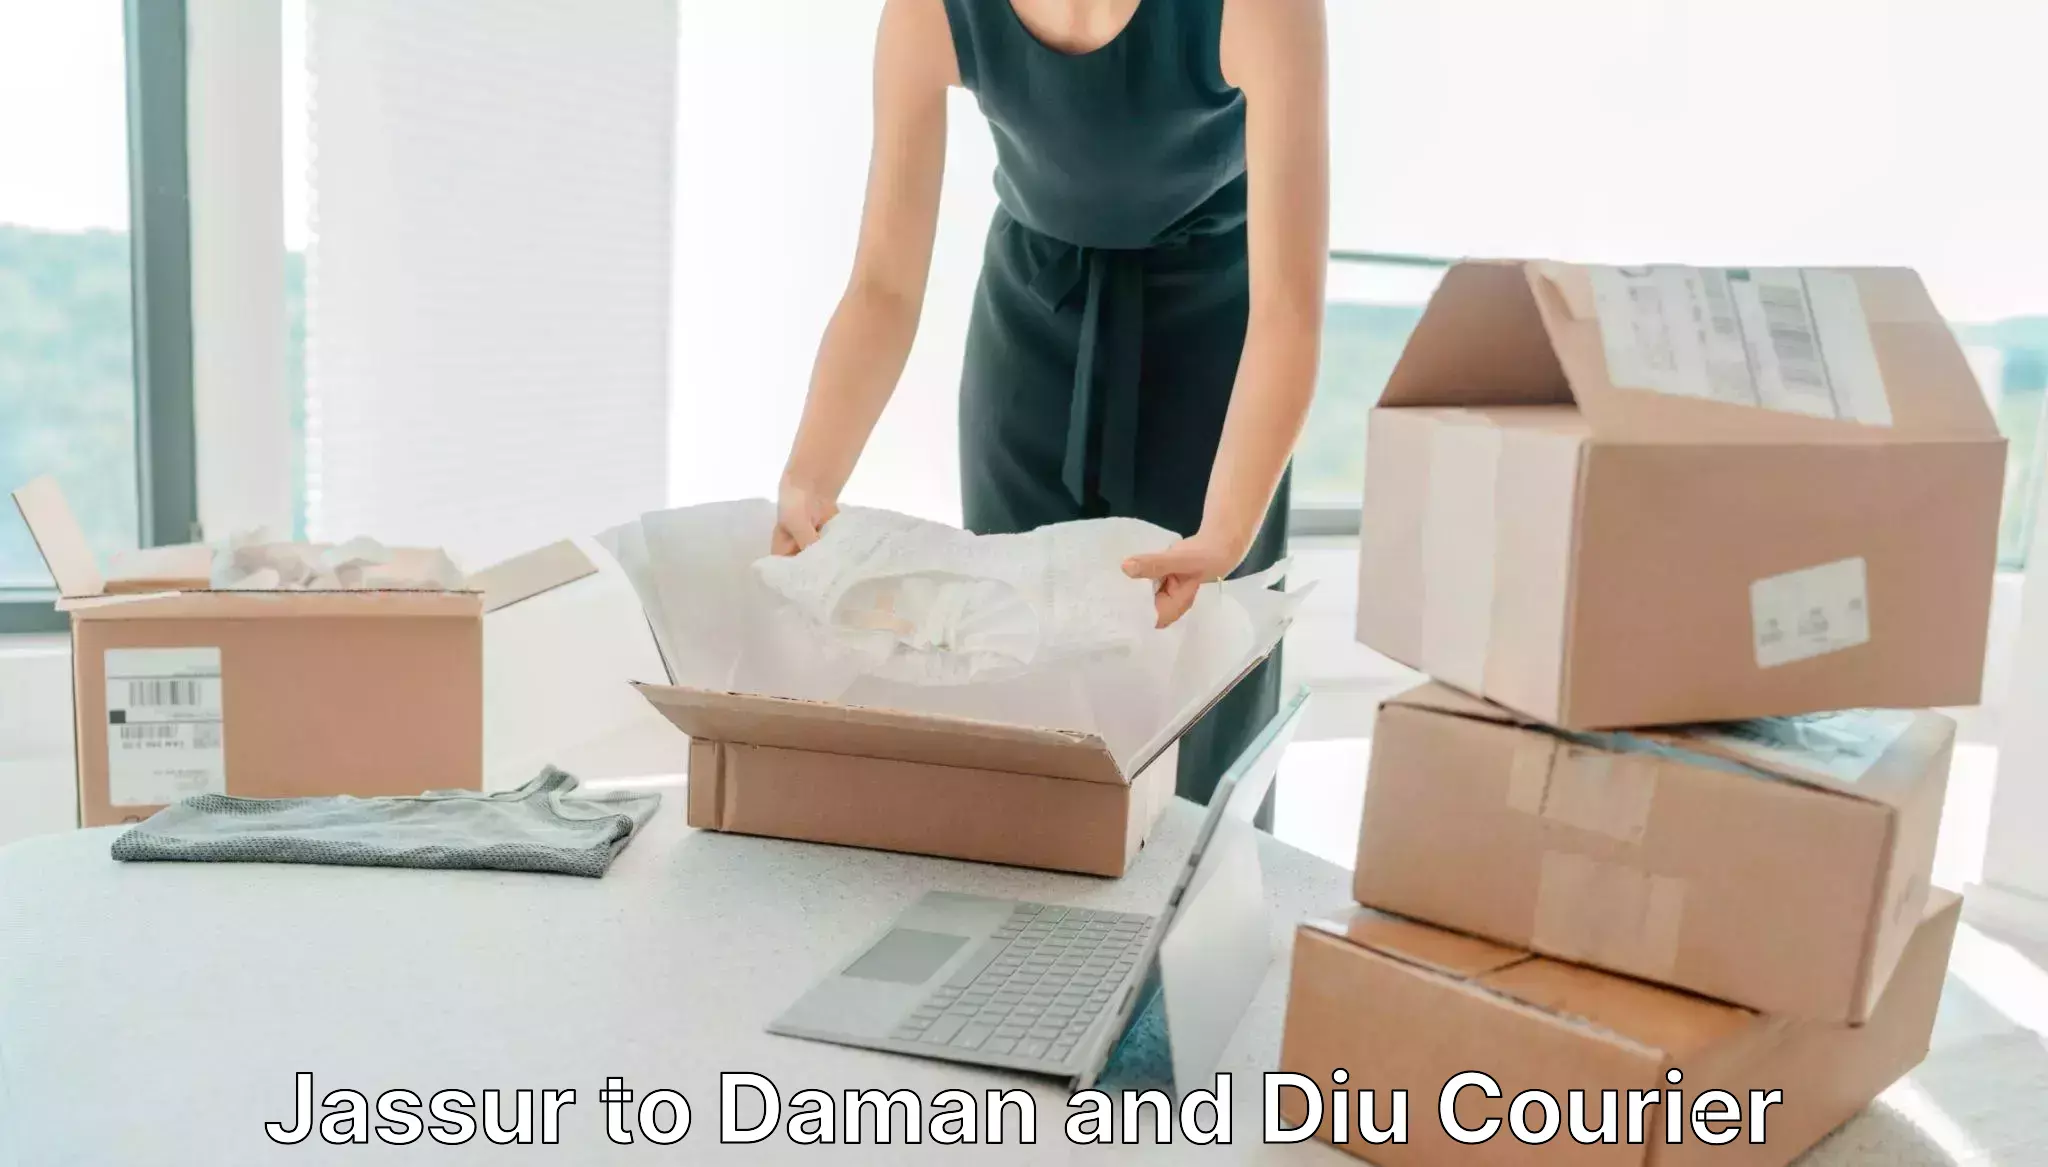 Nationwide shipping coverage Jassur to Daman and Diu